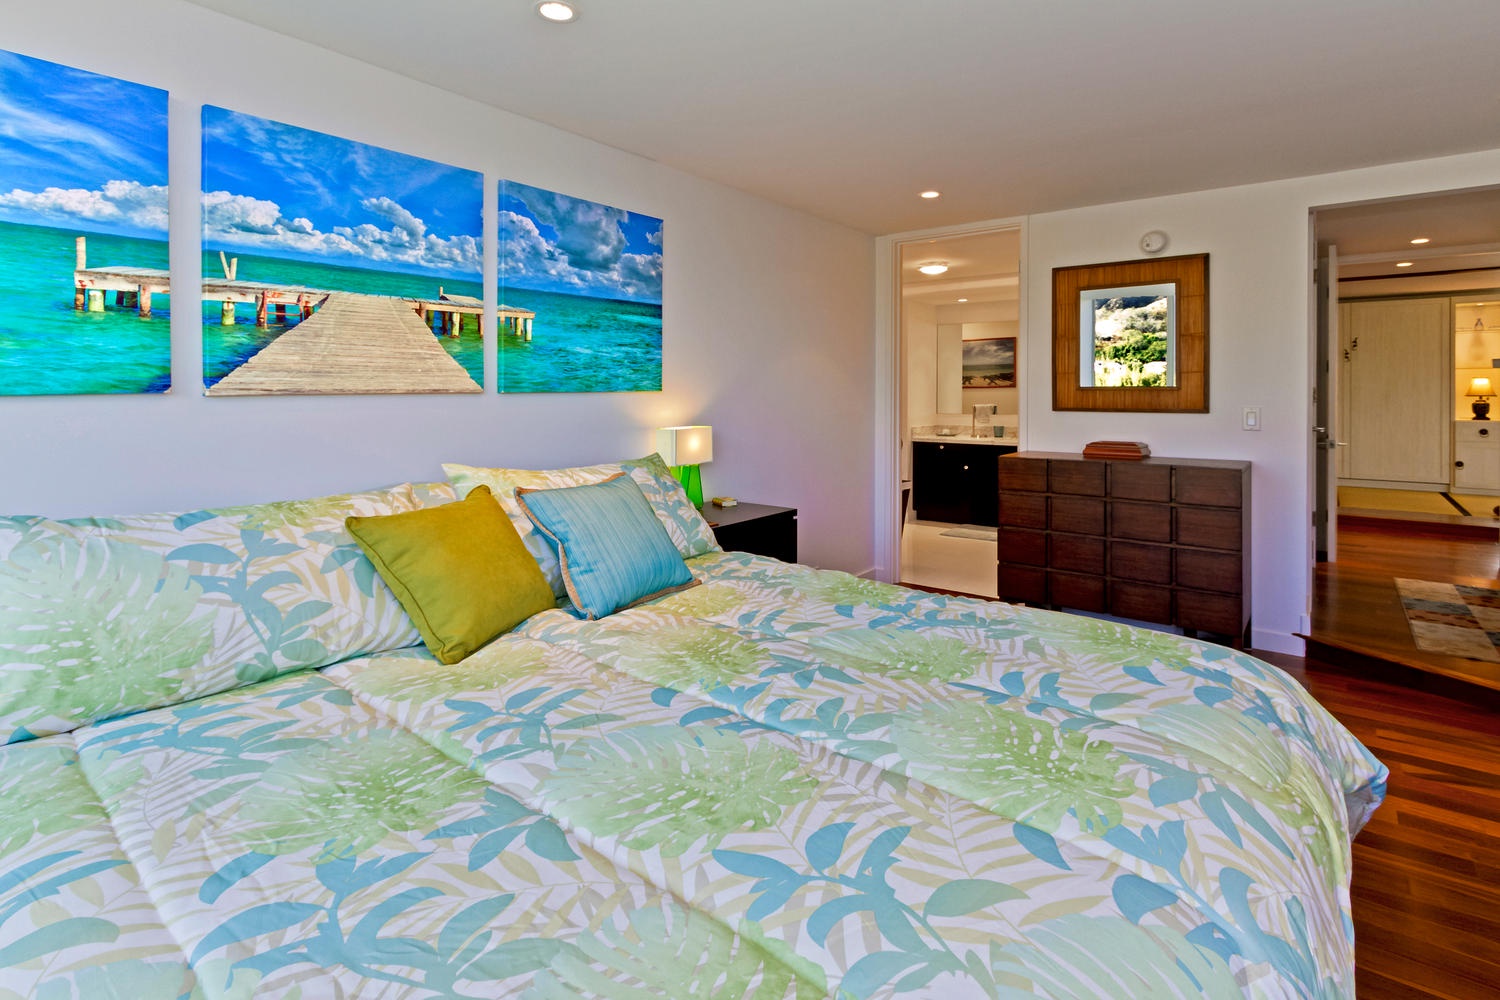 Honolulu Vacation Rentals, Executive Gold Coast Oceanfront Suite - Primary bedroom with a king-size bed. Television in room is not pictured.